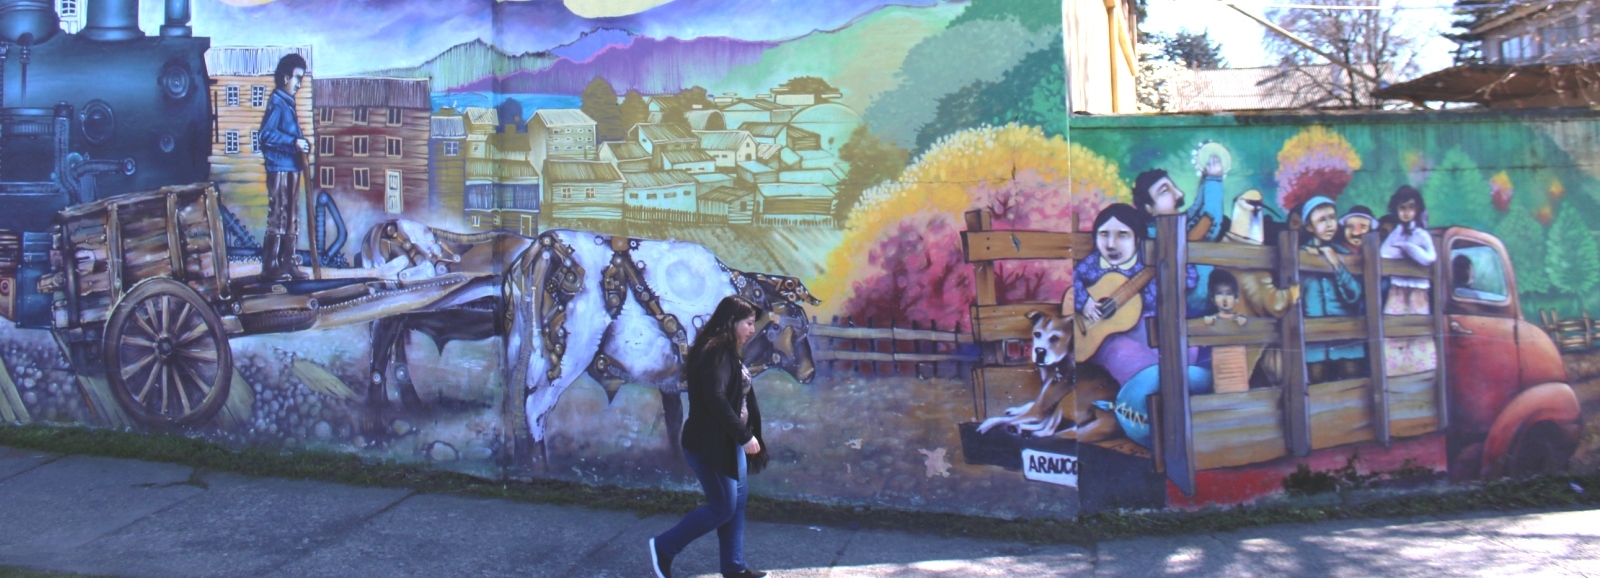 Street scene with mural in front of Pucon Spanish School